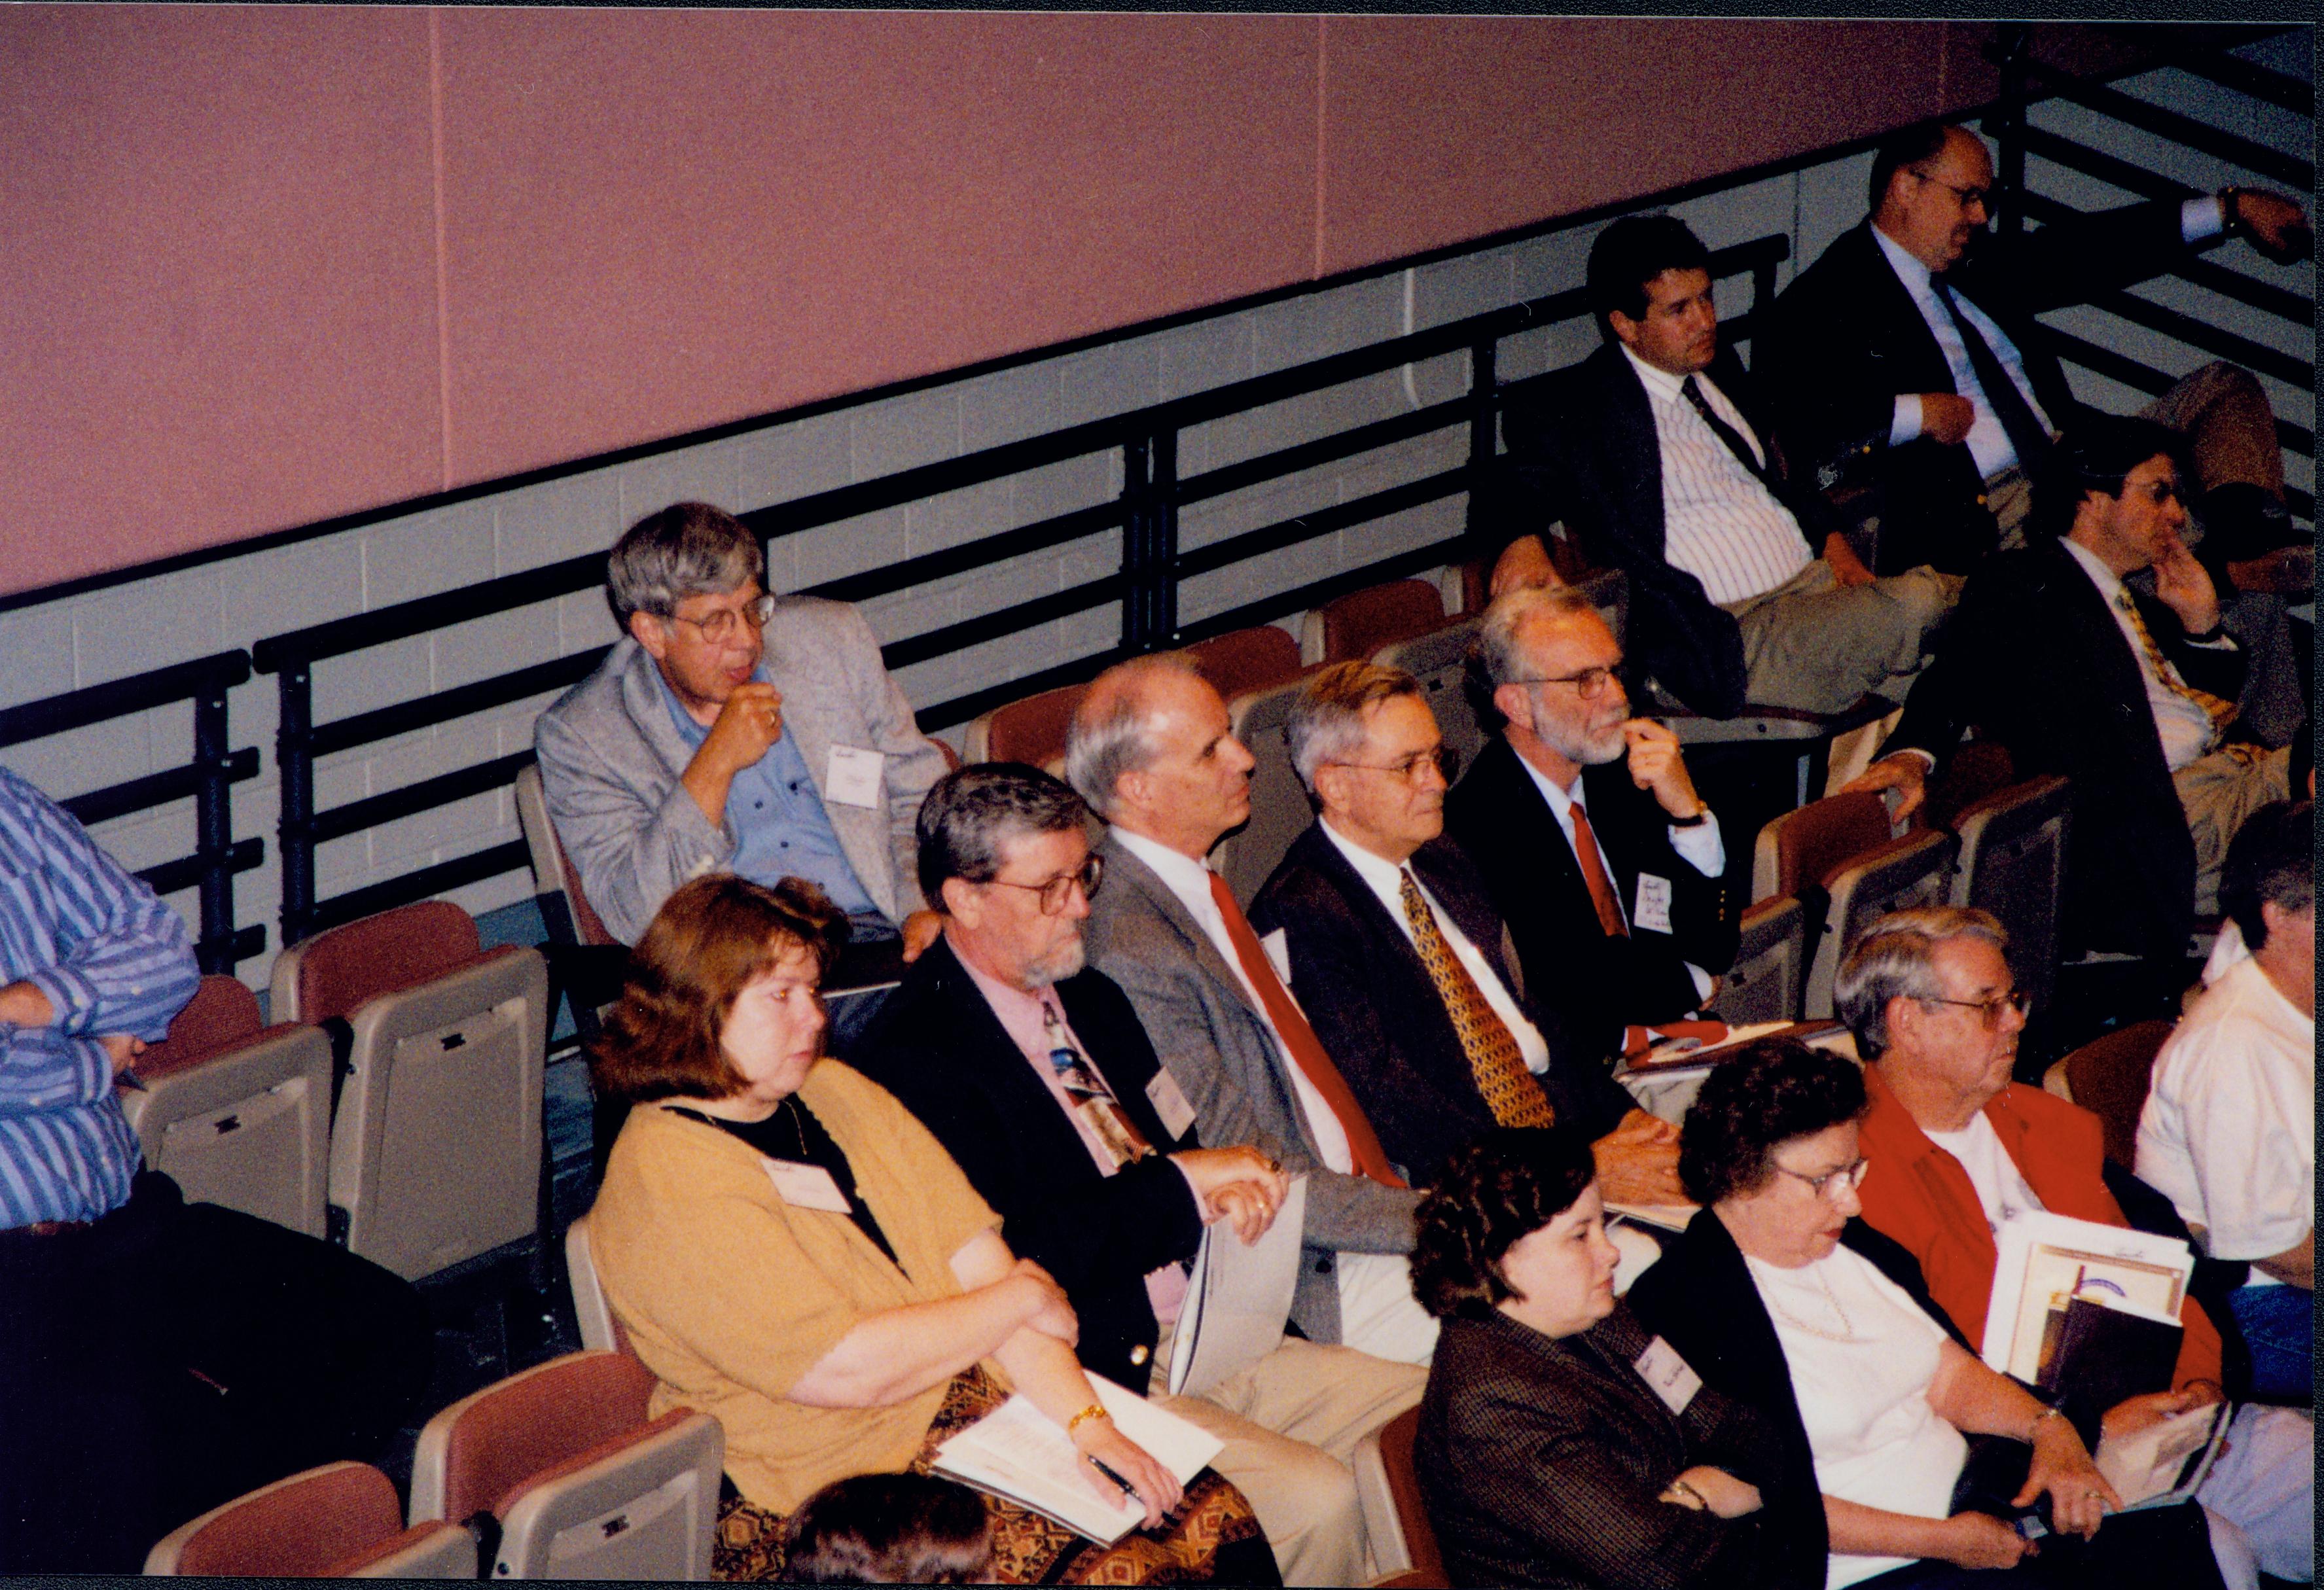 Audience seated on risers. 1999-12; 15 Colloquium, 1999